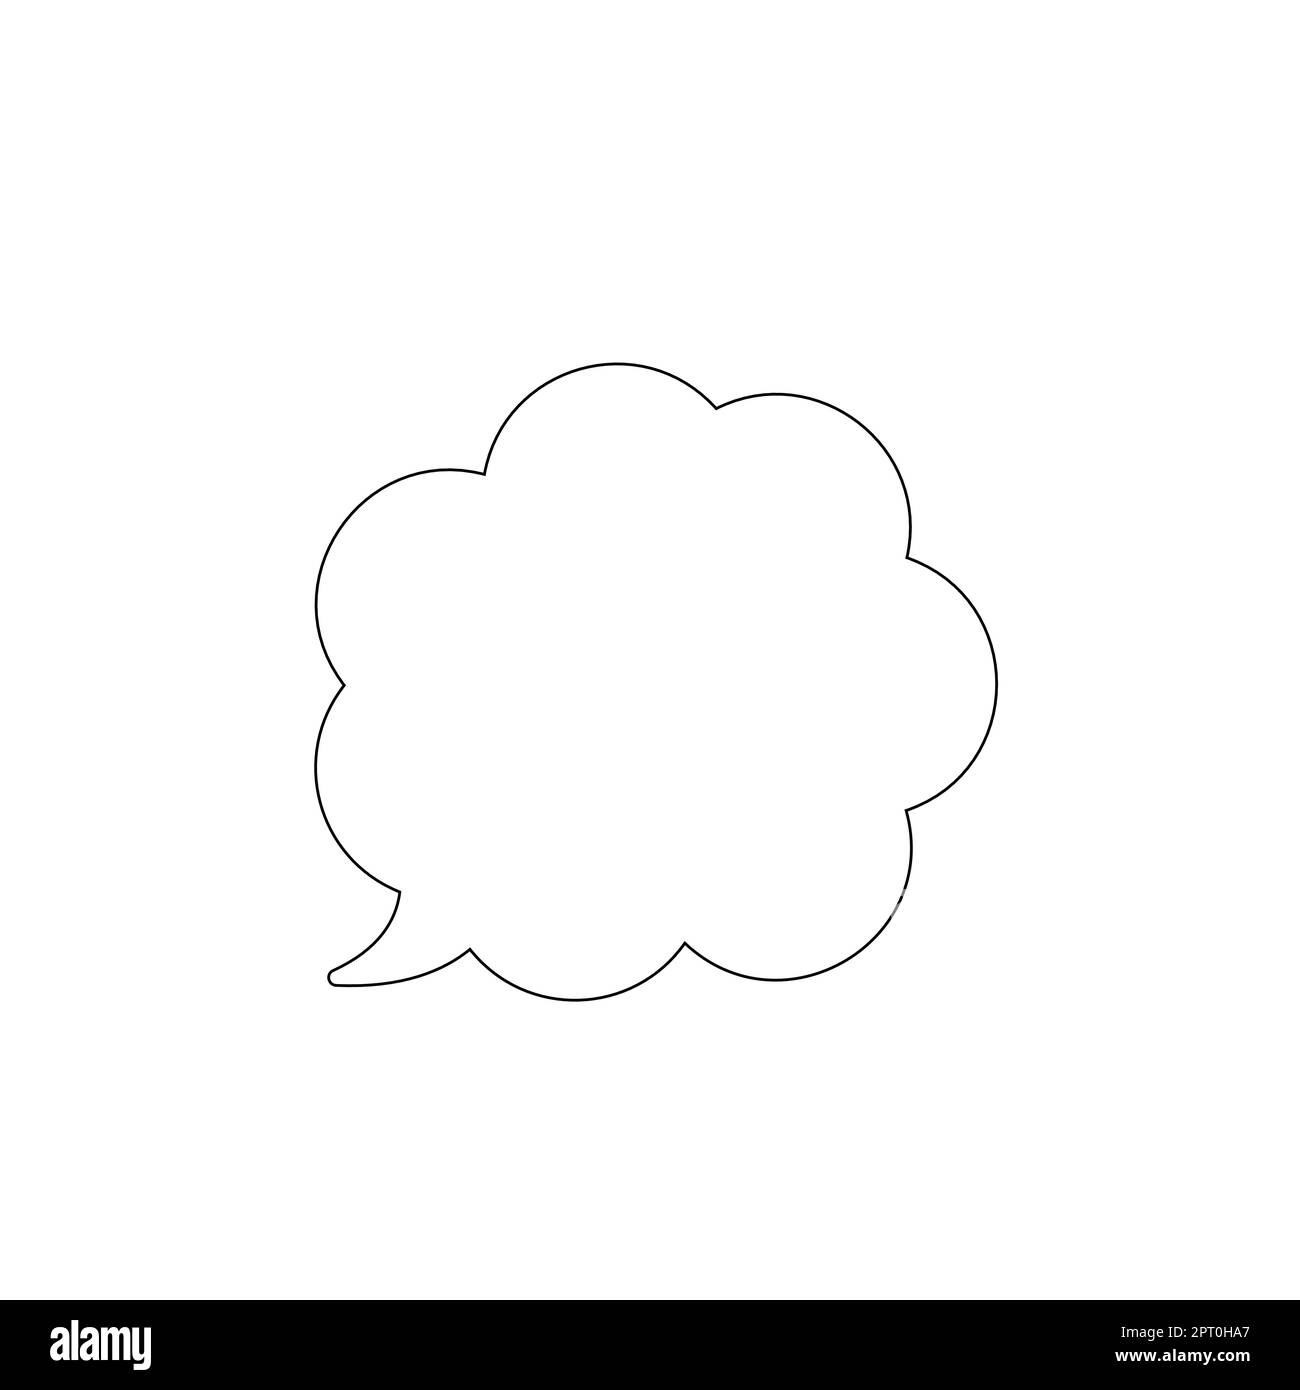 Speech bubble with black outline isolated on white background. Vector illustration Stock Vector